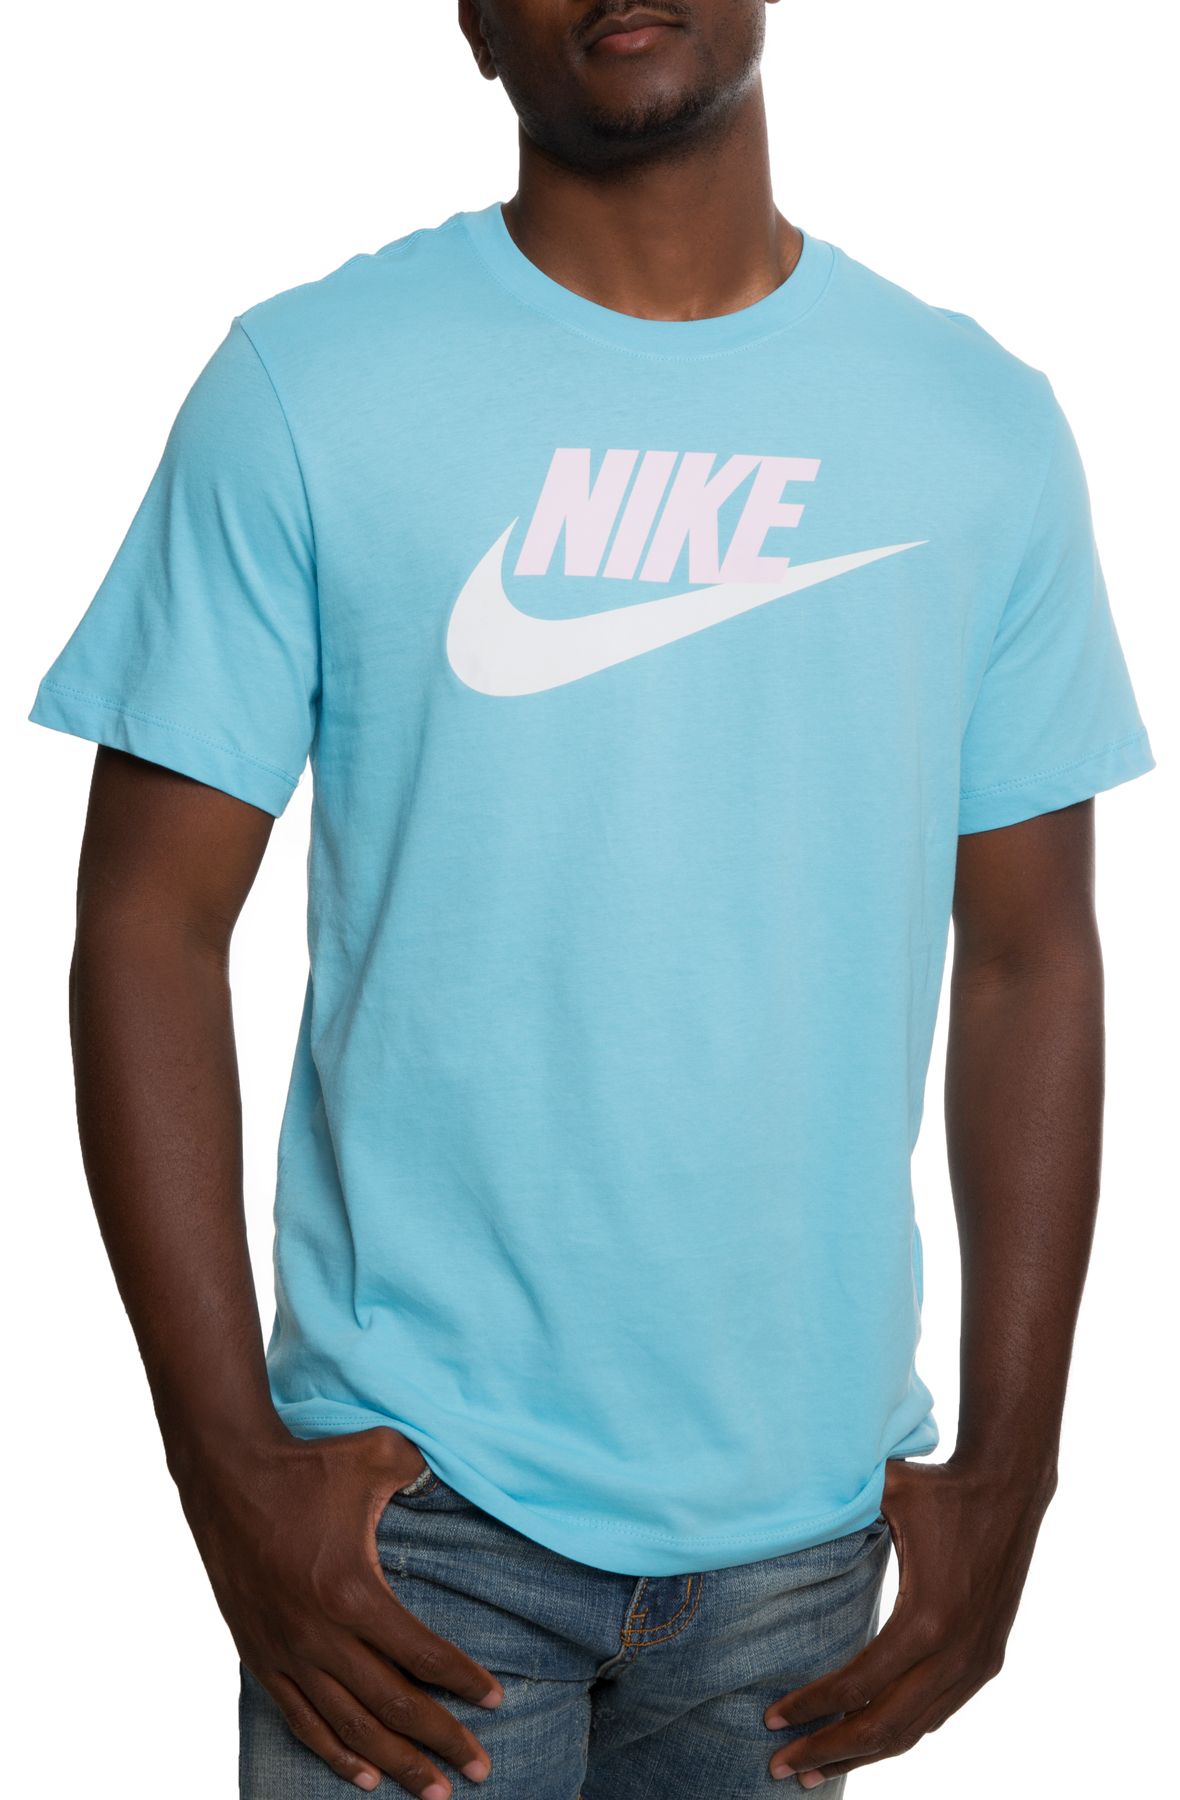 pink blue and white nike shirt